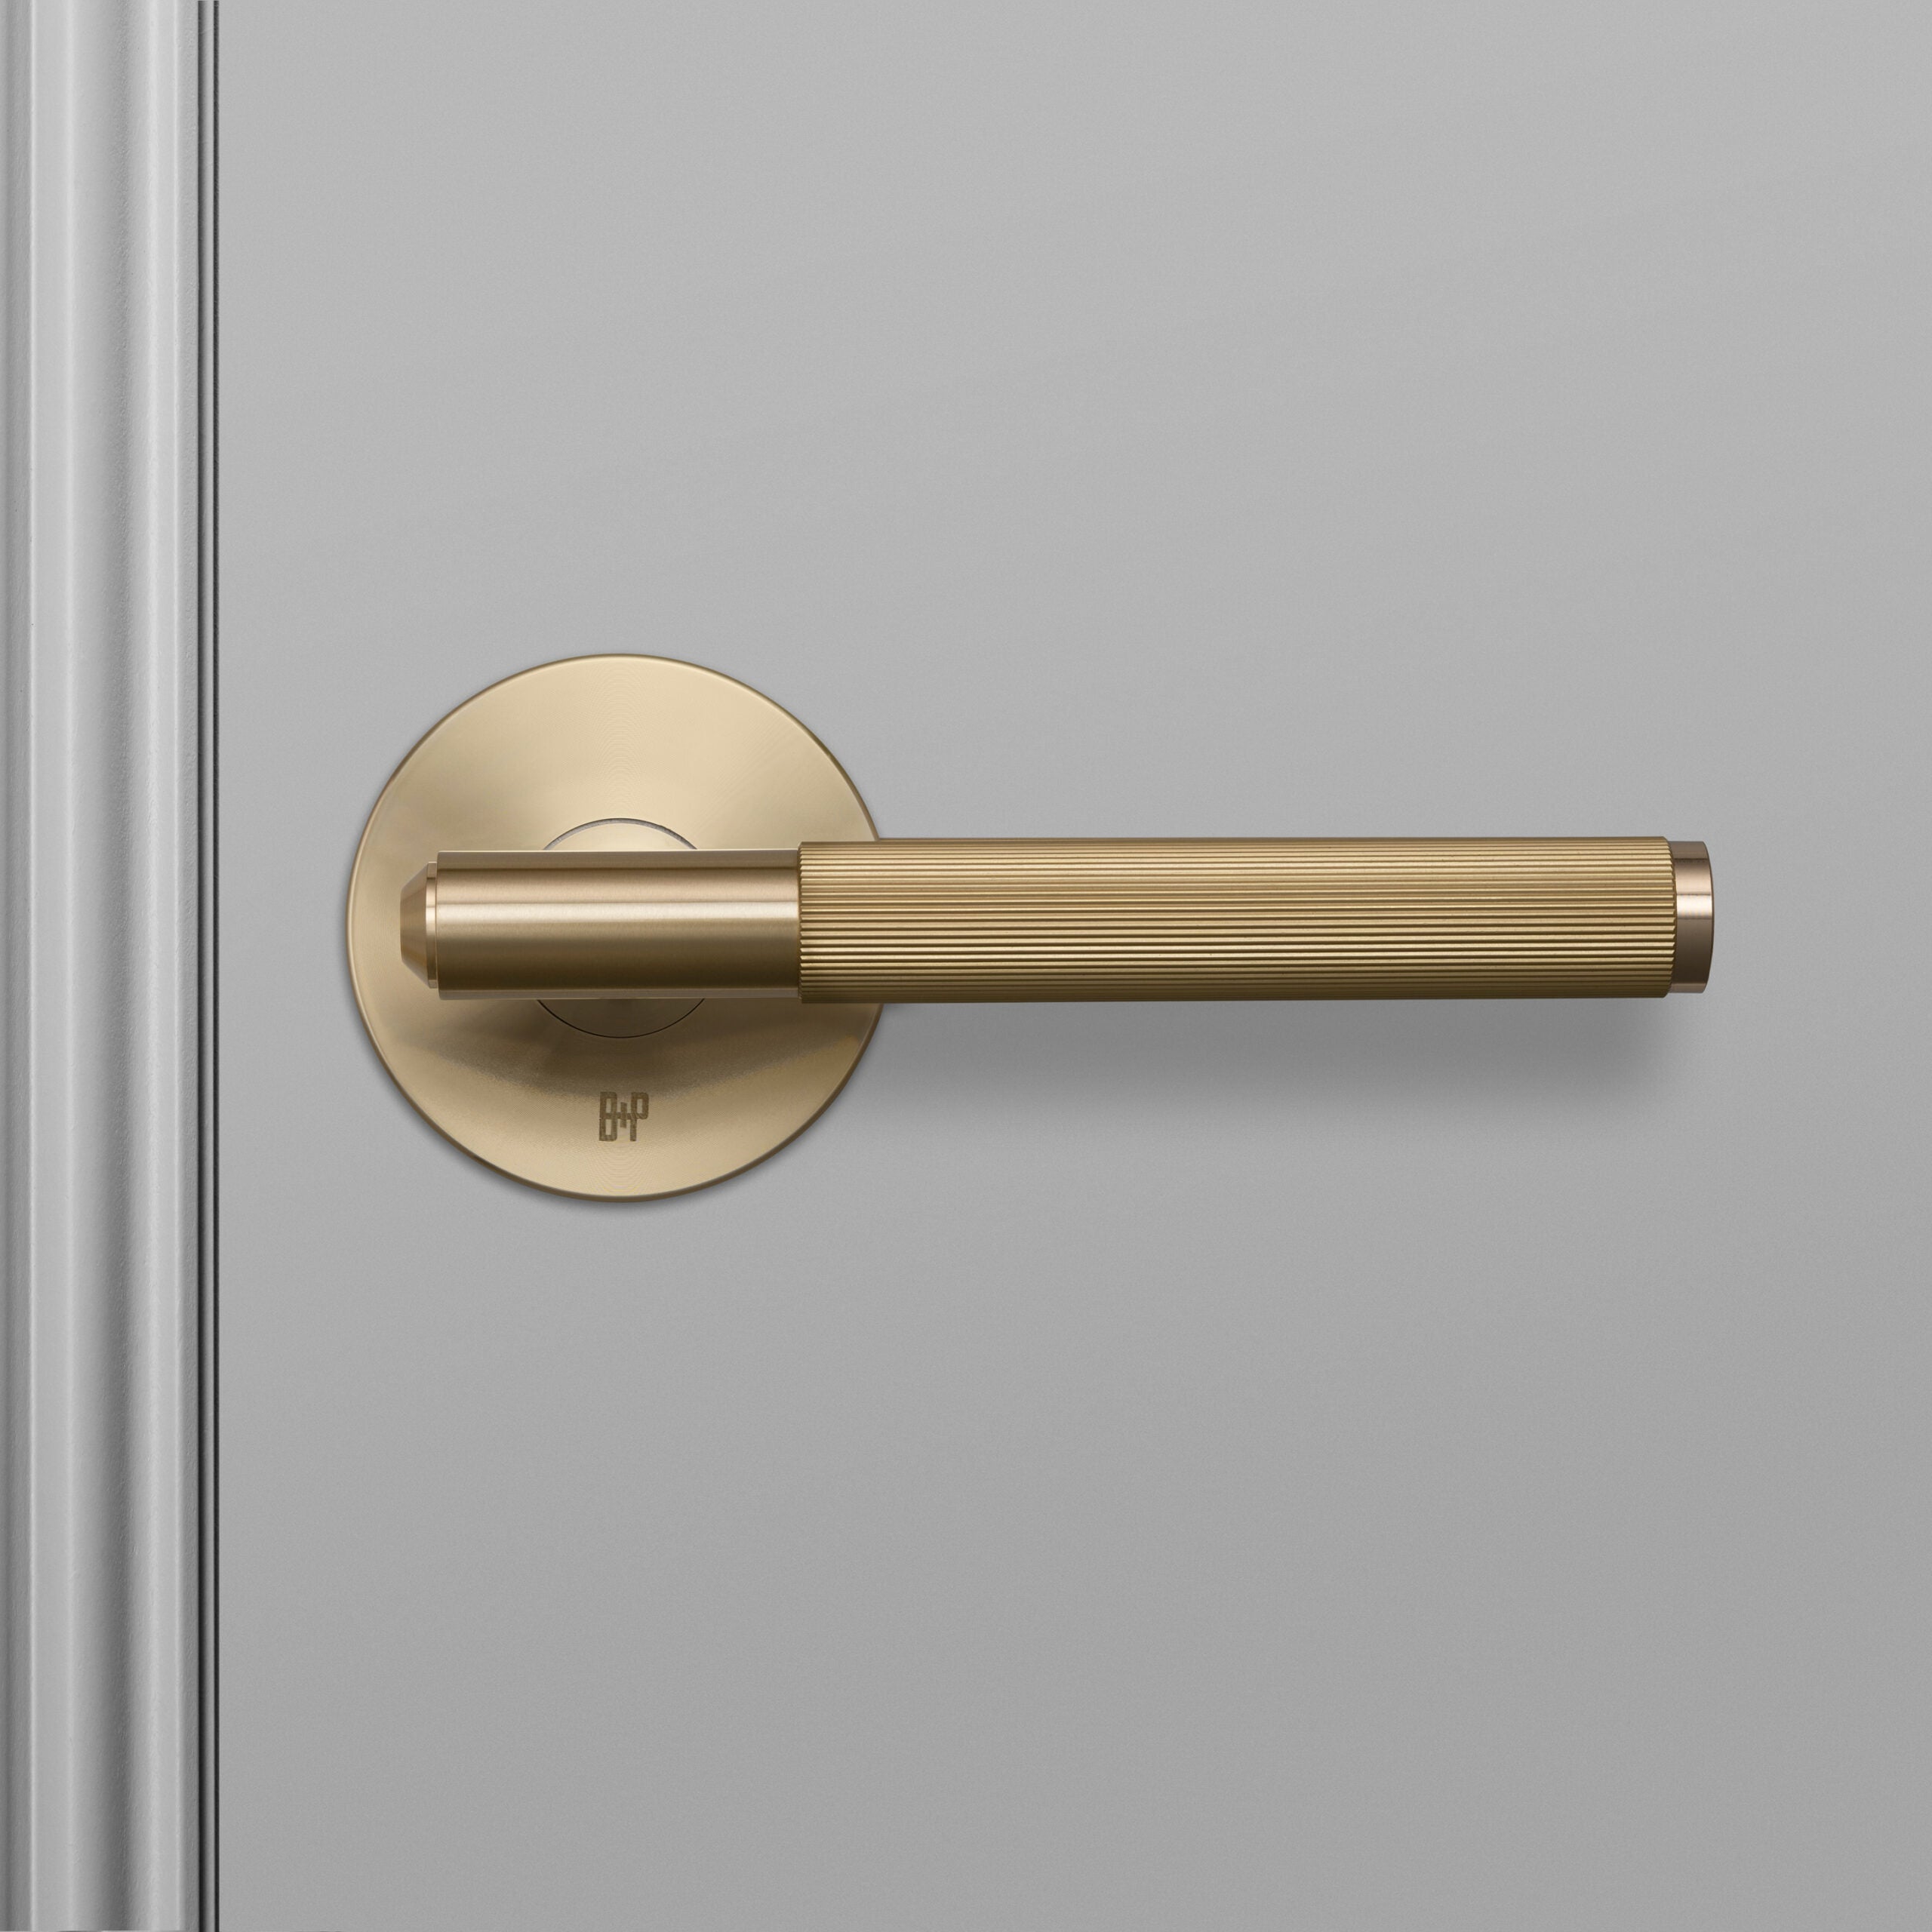 Buster + Punch Conventional Door Handle, Linear Design - PRIVACY TYPE